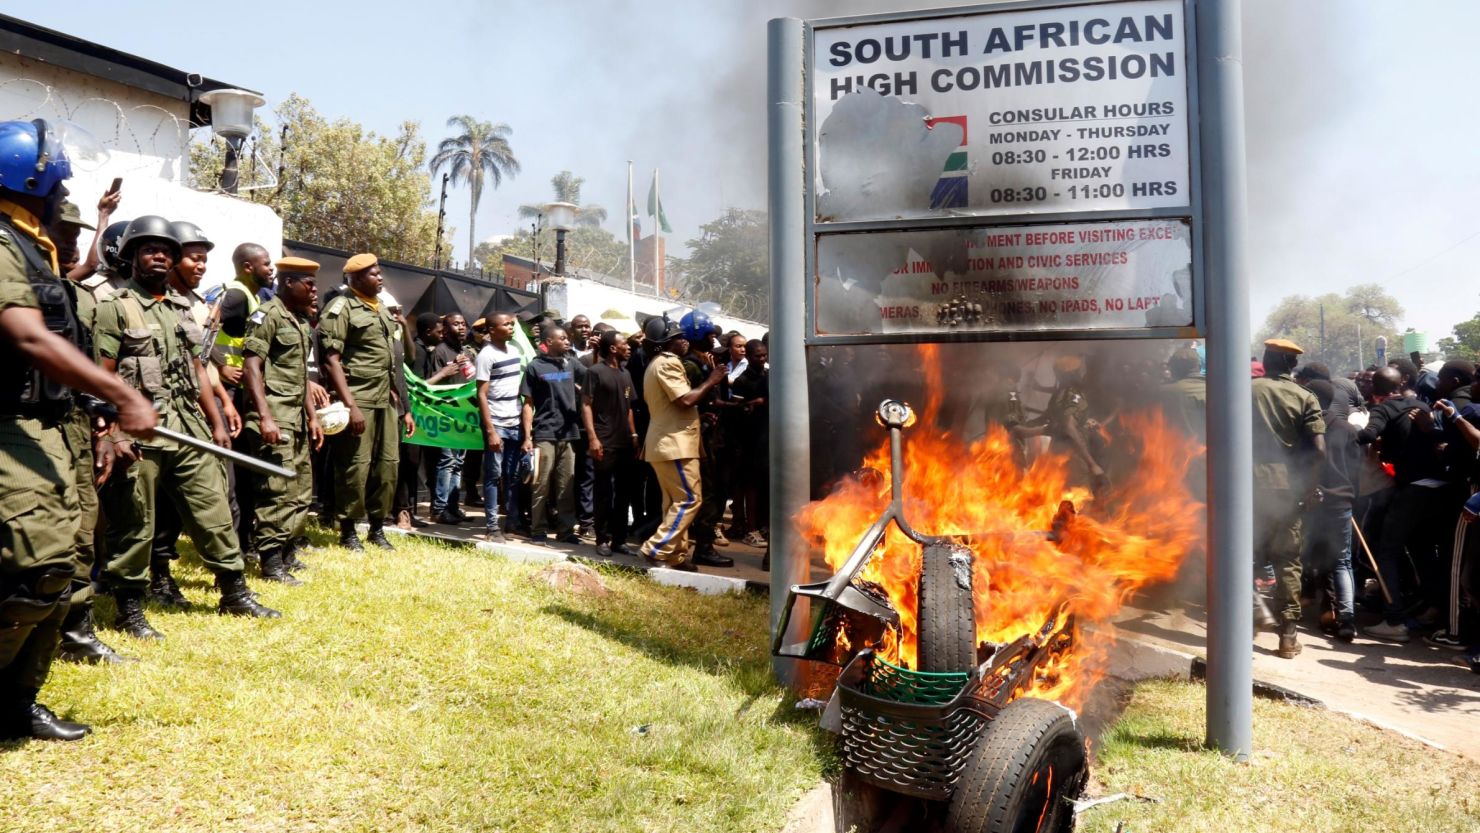 Zambia's university students burn the sign outside the South African Embassy in Lusaka on September 4, 2019 during a demonstration to protest against xenophobic attacks on foreign nationals in the Rainbow Nation. (Photo by SALIM DAWOOD / AFP) 